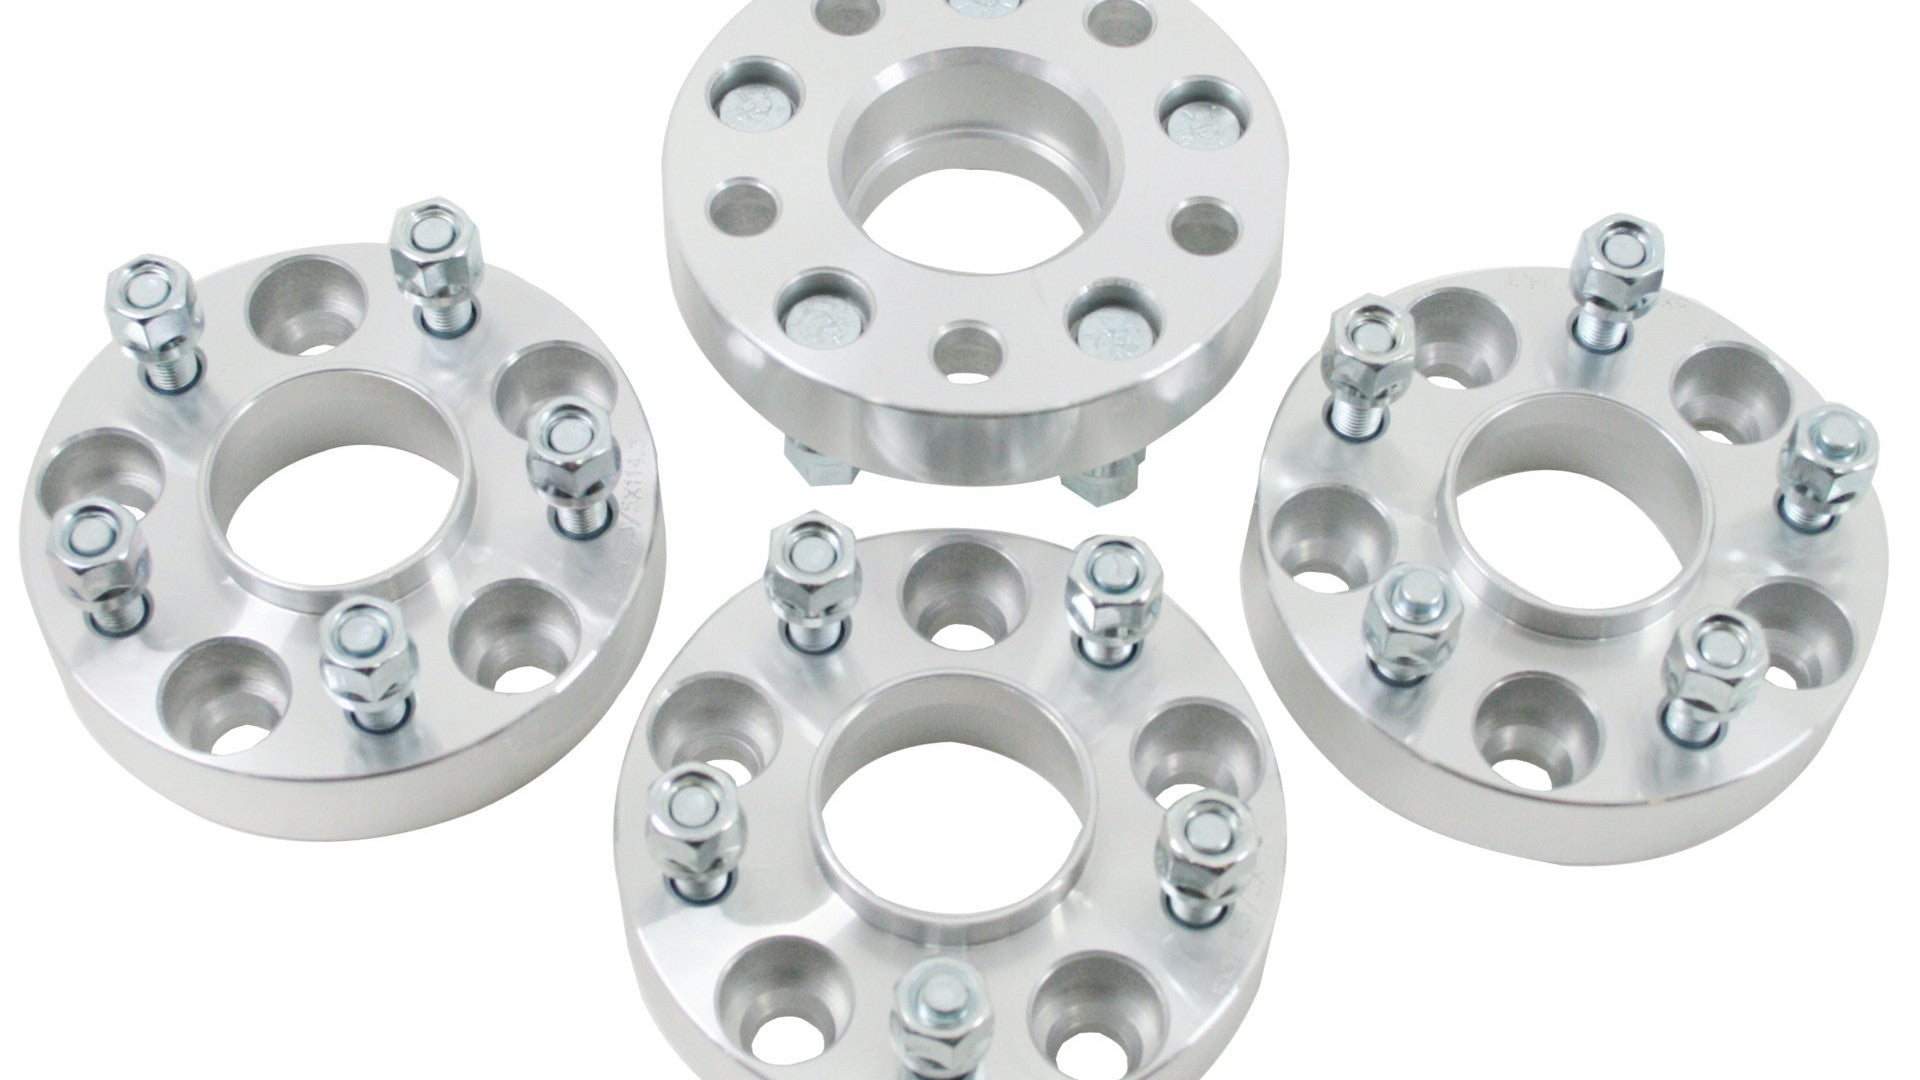 Direct4x4 heavy duty wheel spacers for 4x4s, SUVs, pickup trucks and vans.